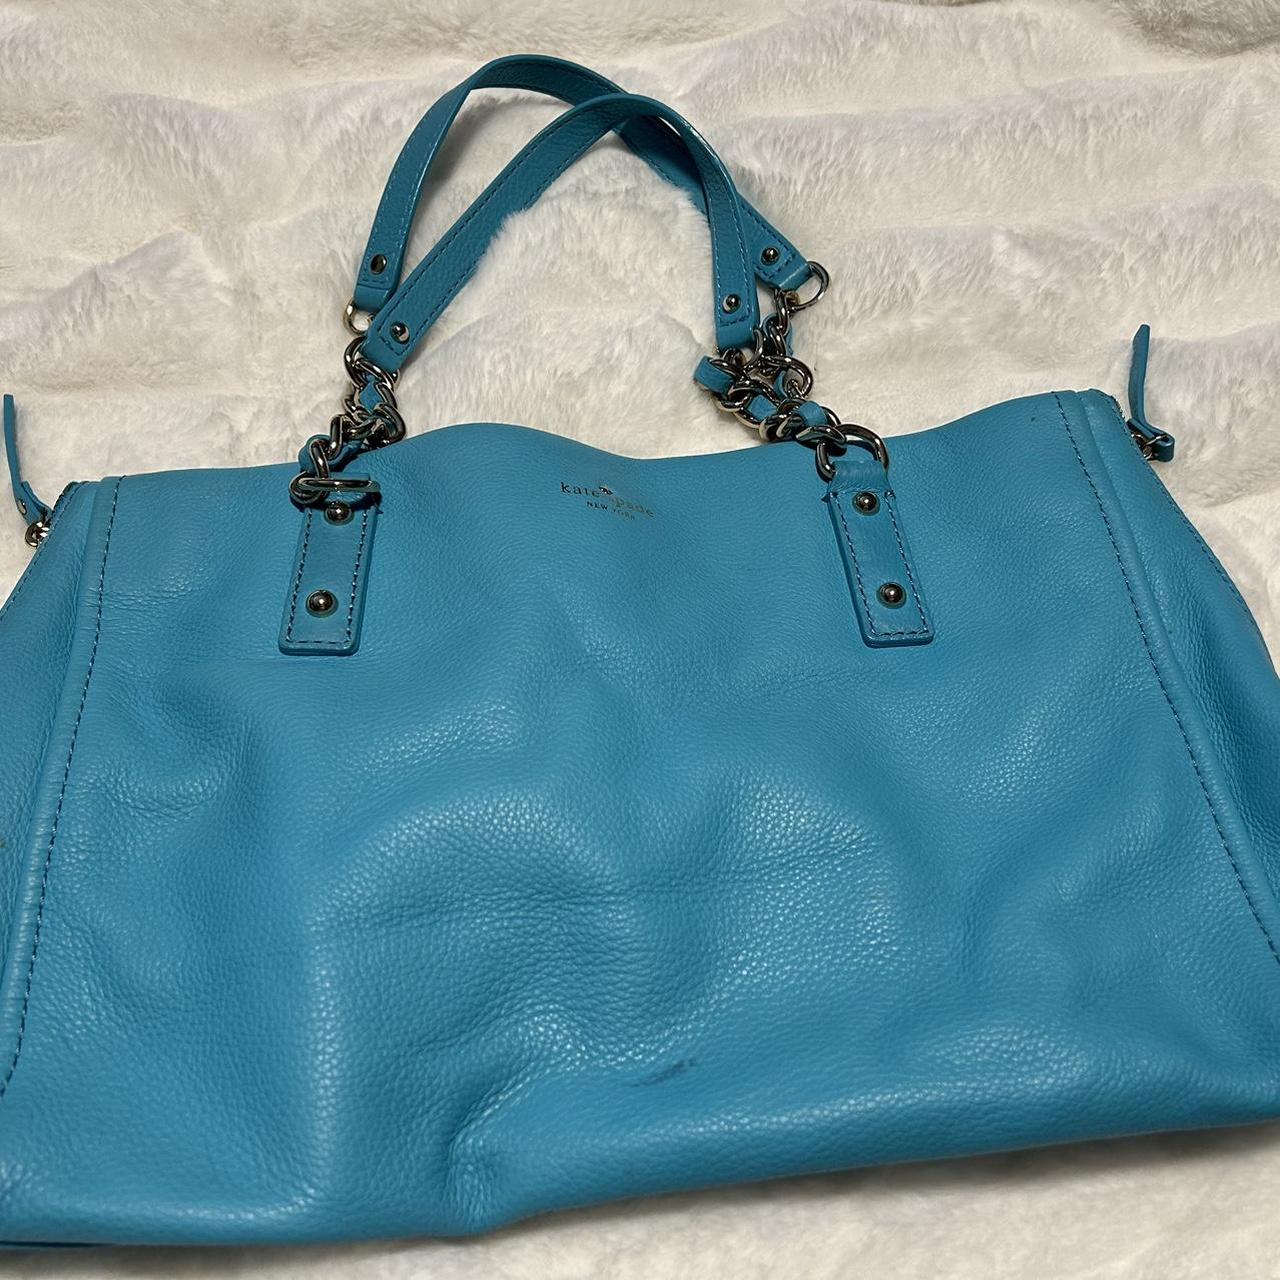 Butterfly Boutique Consignments - KATE SPADE pale pink 3 compartment purse  with shoulder strap $139 ... KATE SPADE turquoise purse $100 ... SPRING  DESIGNER/ LUXURY CONSIGNMENTS now being accepted! Shop Fashion Forward